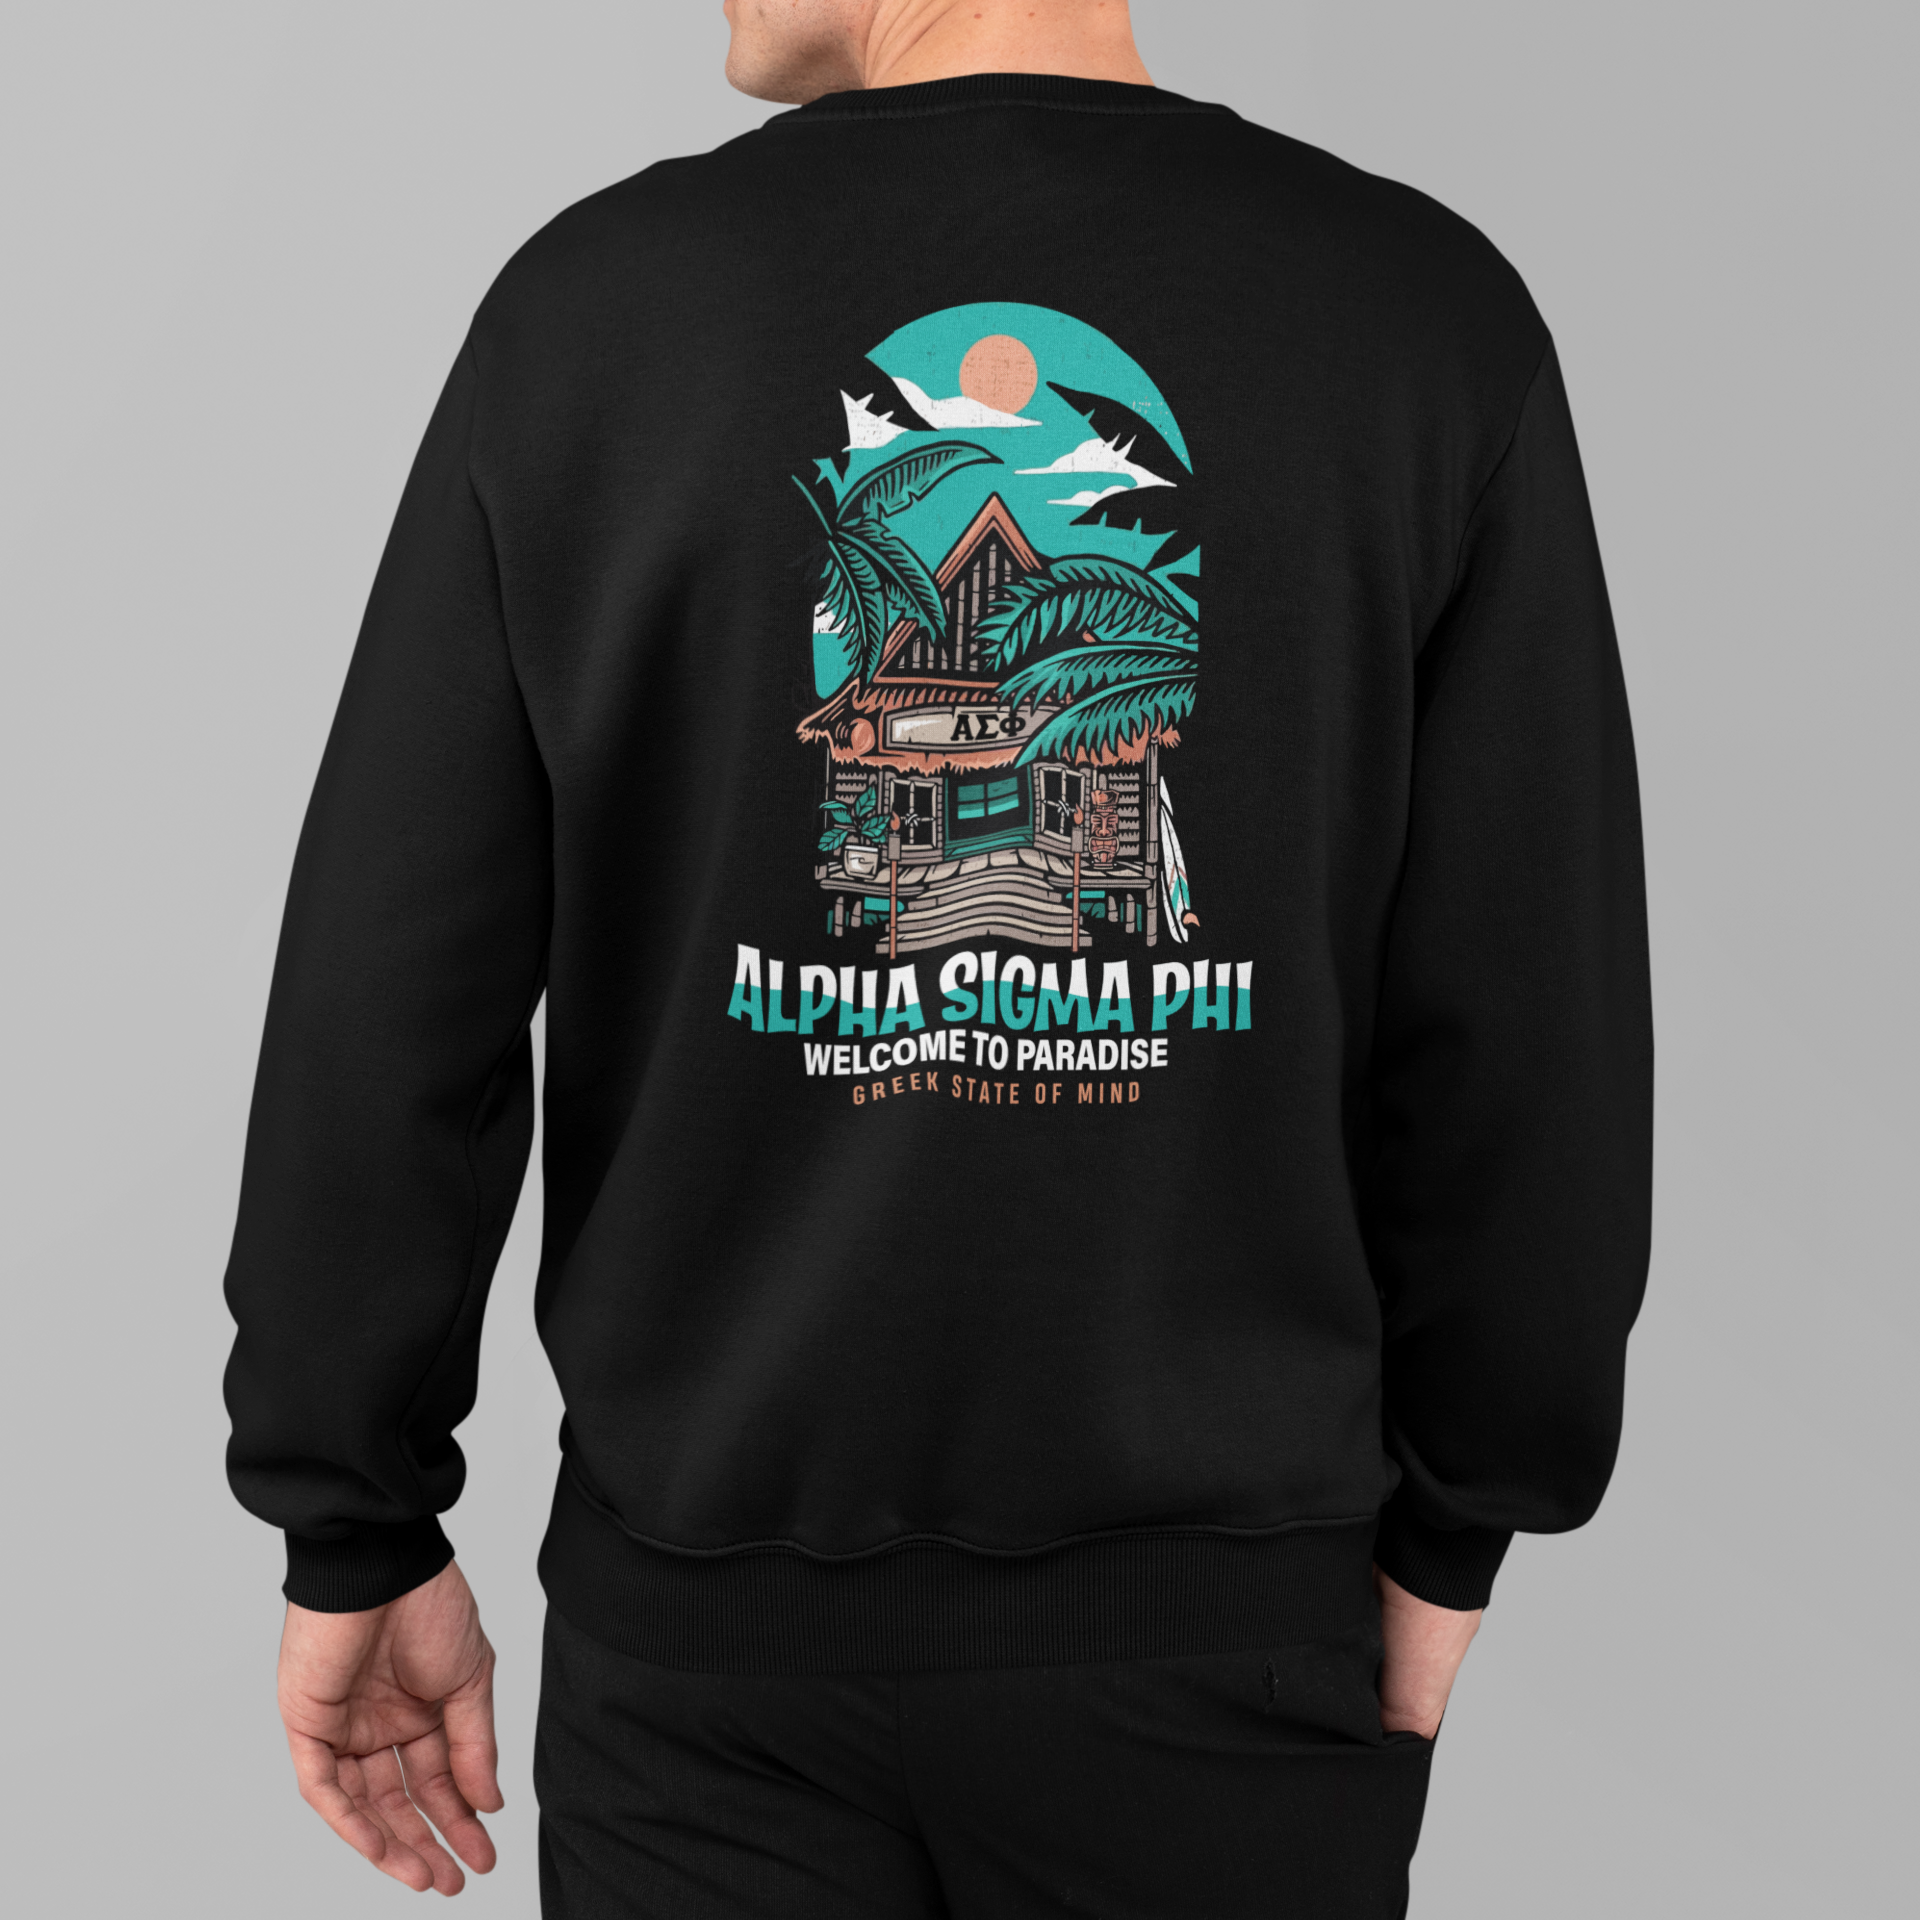 Alpha Sigma Phi Graphic Crewneck Sweatshirt | Welcome to Paradise | Alpha Sigma Phi Fraternity Clothes back model 